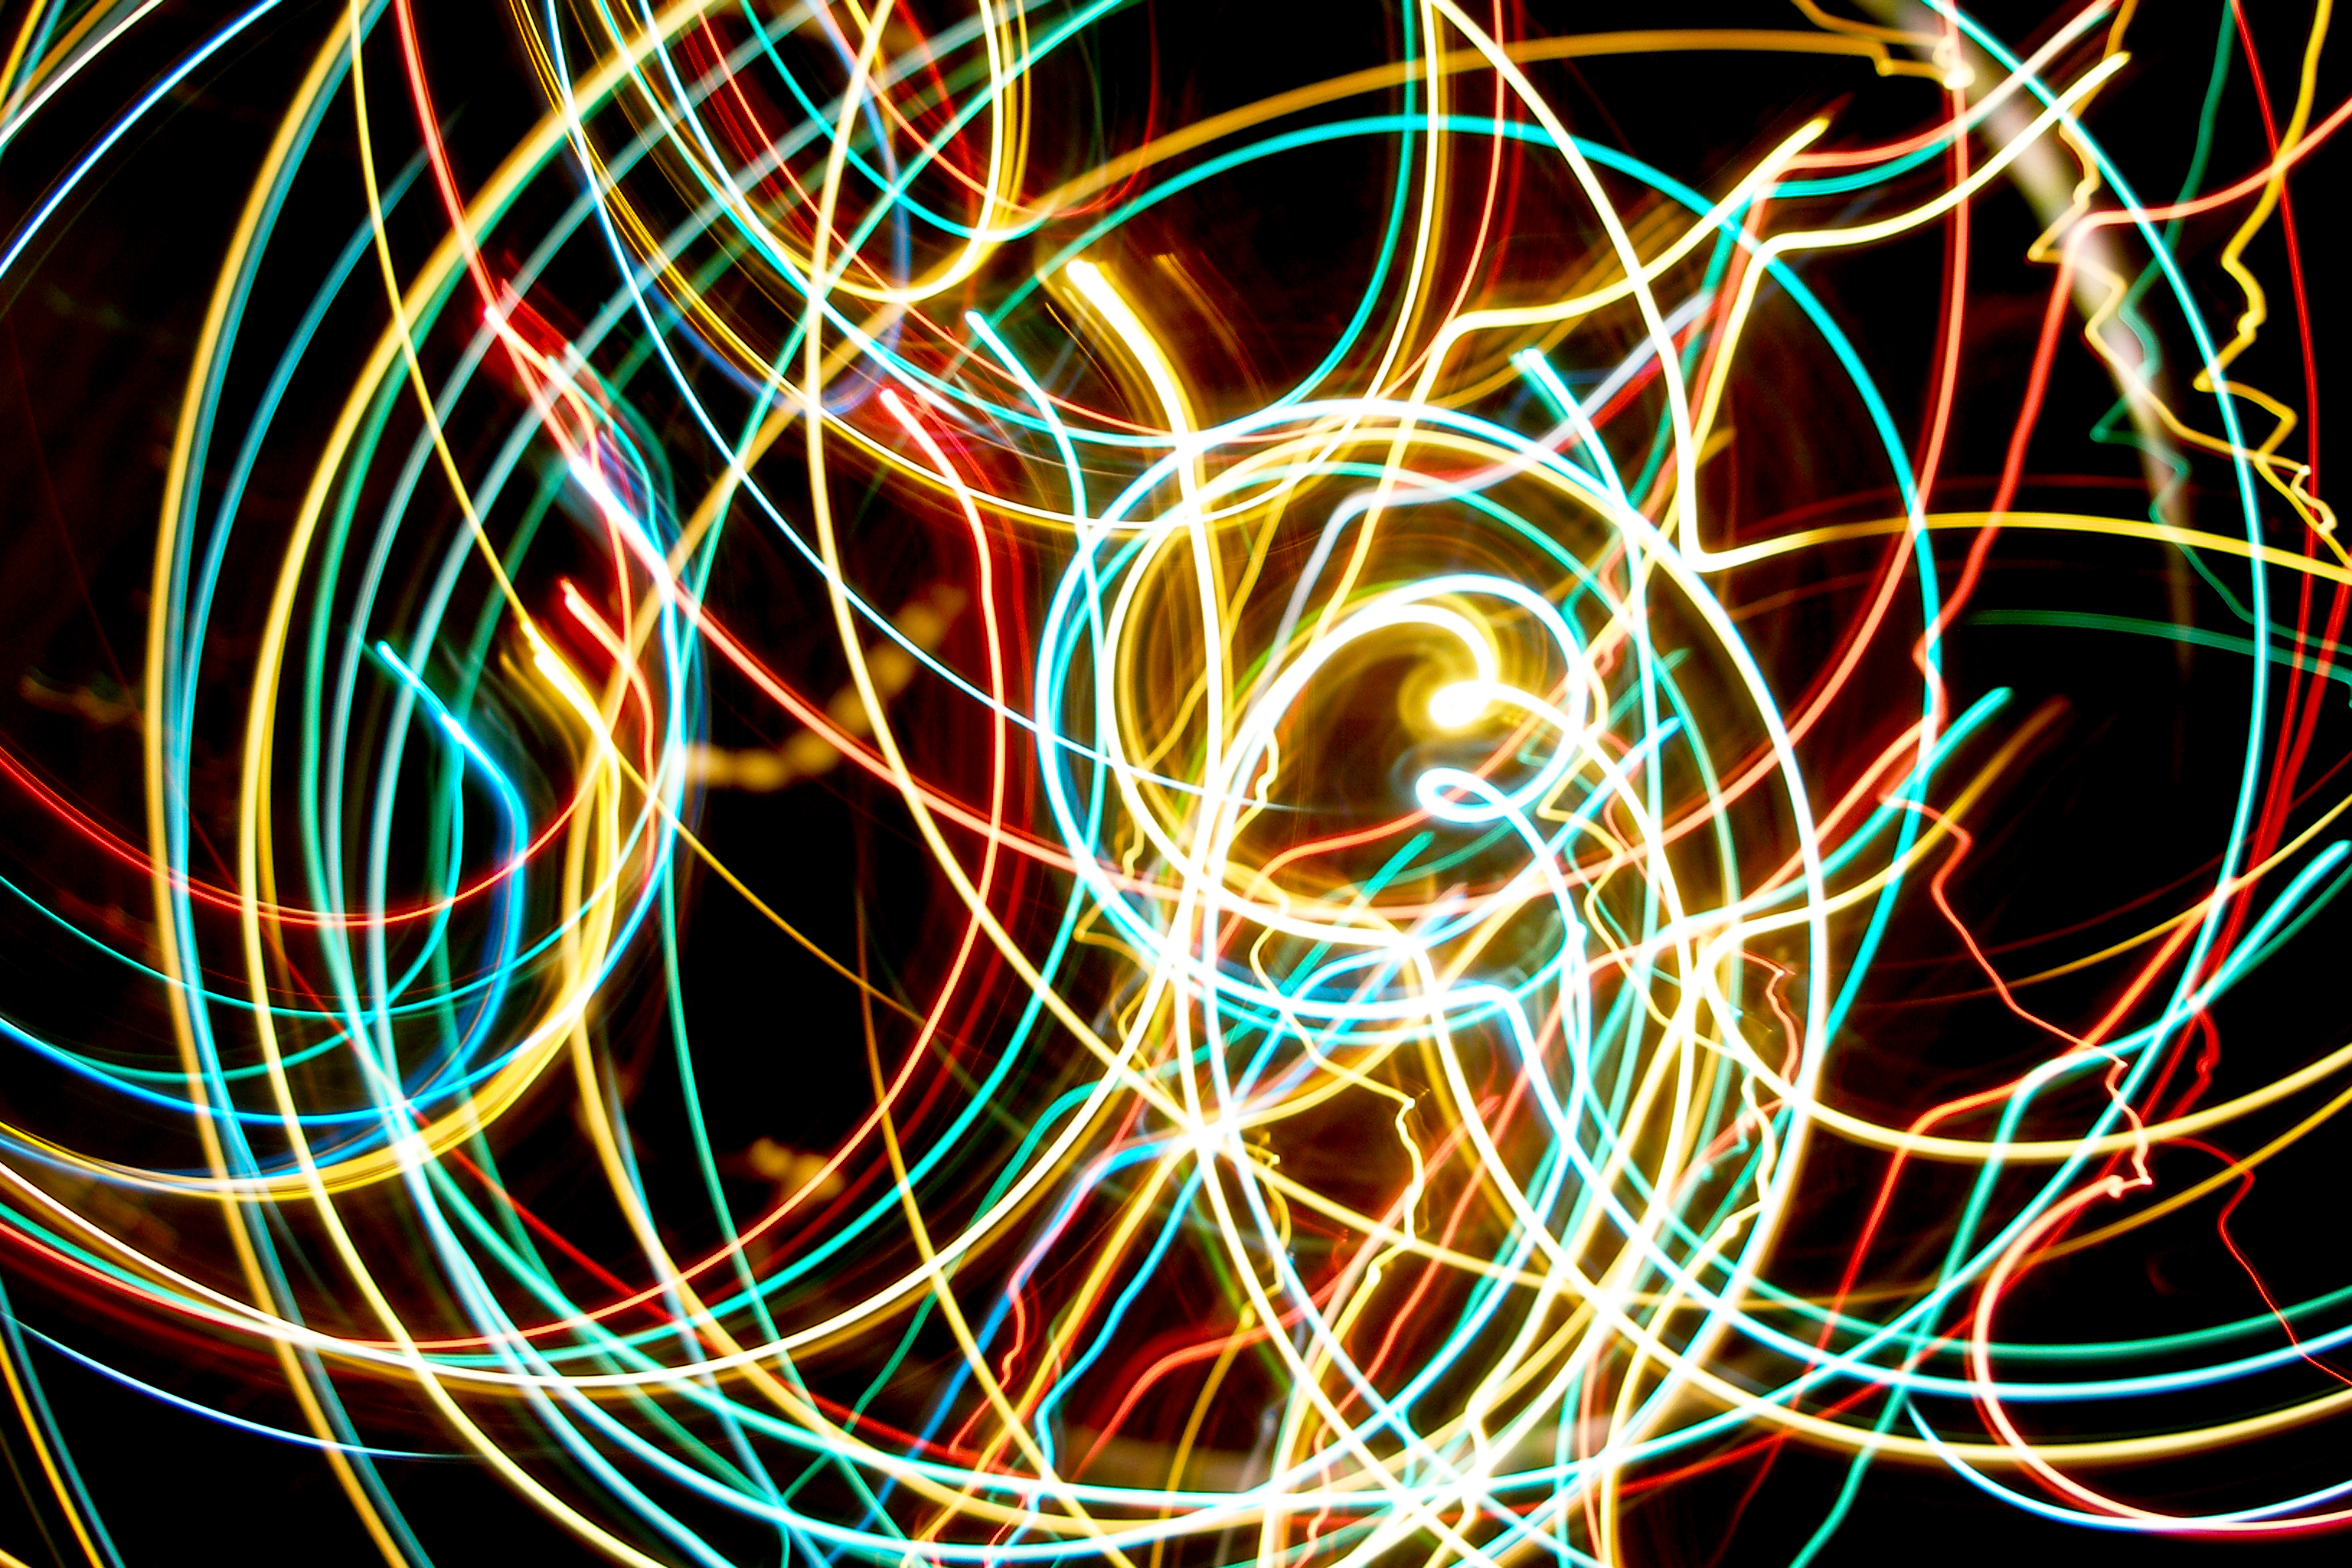 Neon swirl / Camera toss at christmas tree lights by Thomas Quine